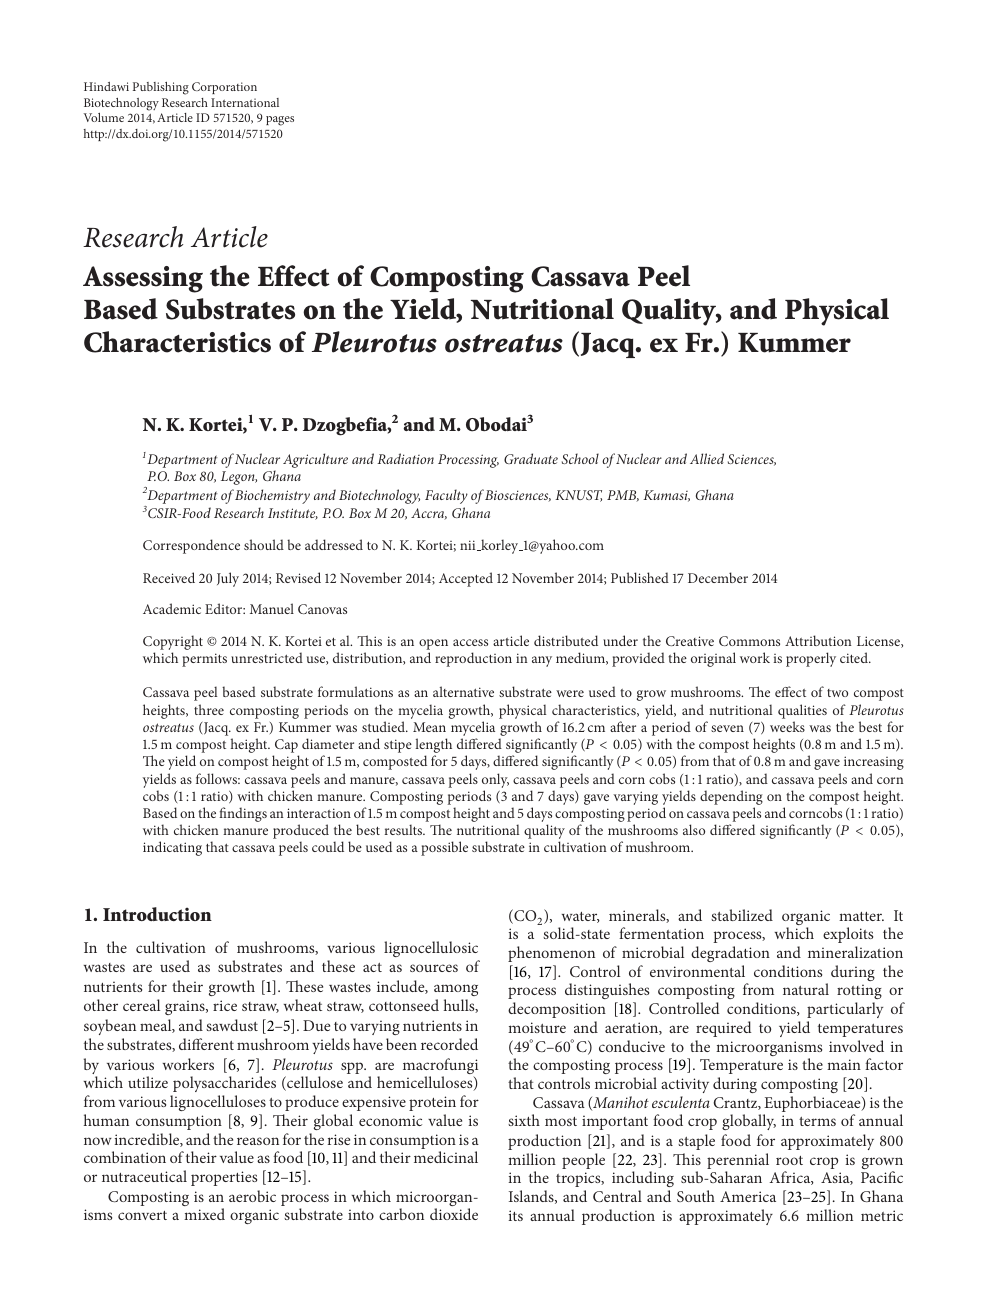 Assessing The Effect Of Composting Cassava Peel Based Substrates On The Yield Nutritional Quality And Physical Characteristics Of Pleurotus Ostreatus Jacq Ex Fr Kummer Topic Of Research Paper In Agriculture Forestry